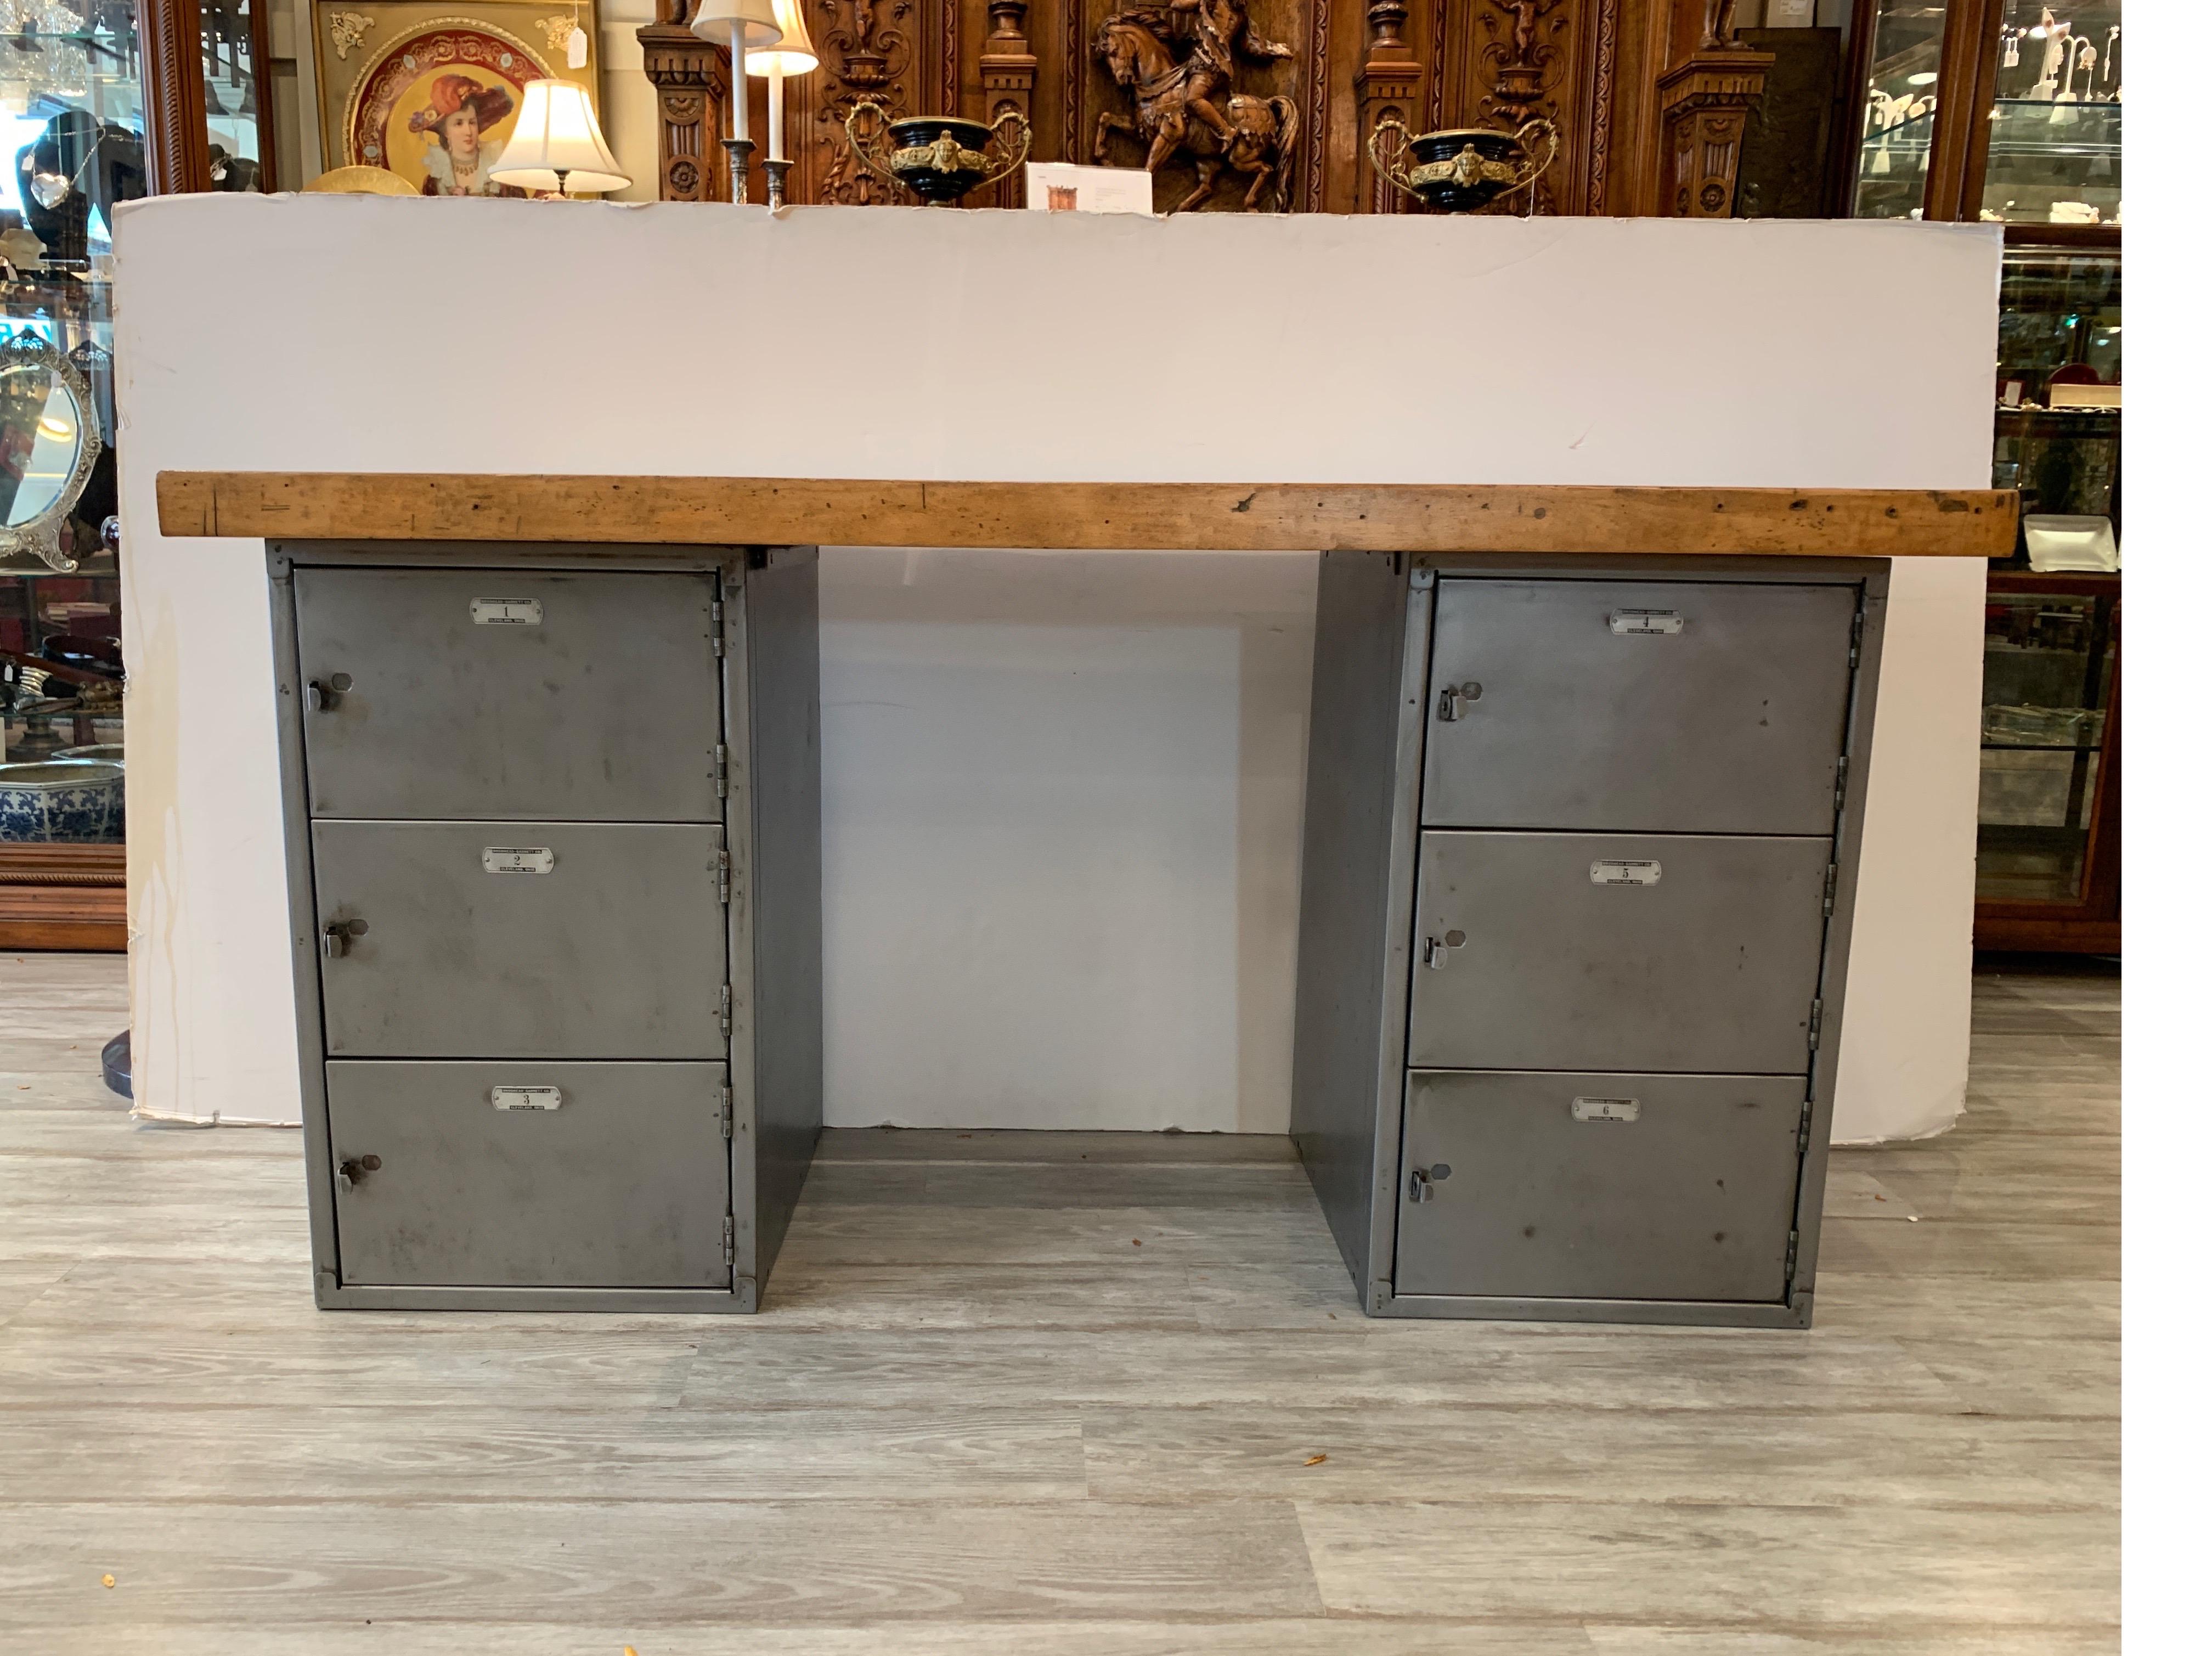 The vintage steel cabinets at the base, numbered 1 and 6 with spring loaded front door. The vintage maple butcher block top has been refinished lightly while still keeping enough of the original character and use to compliment the aged vintage steel